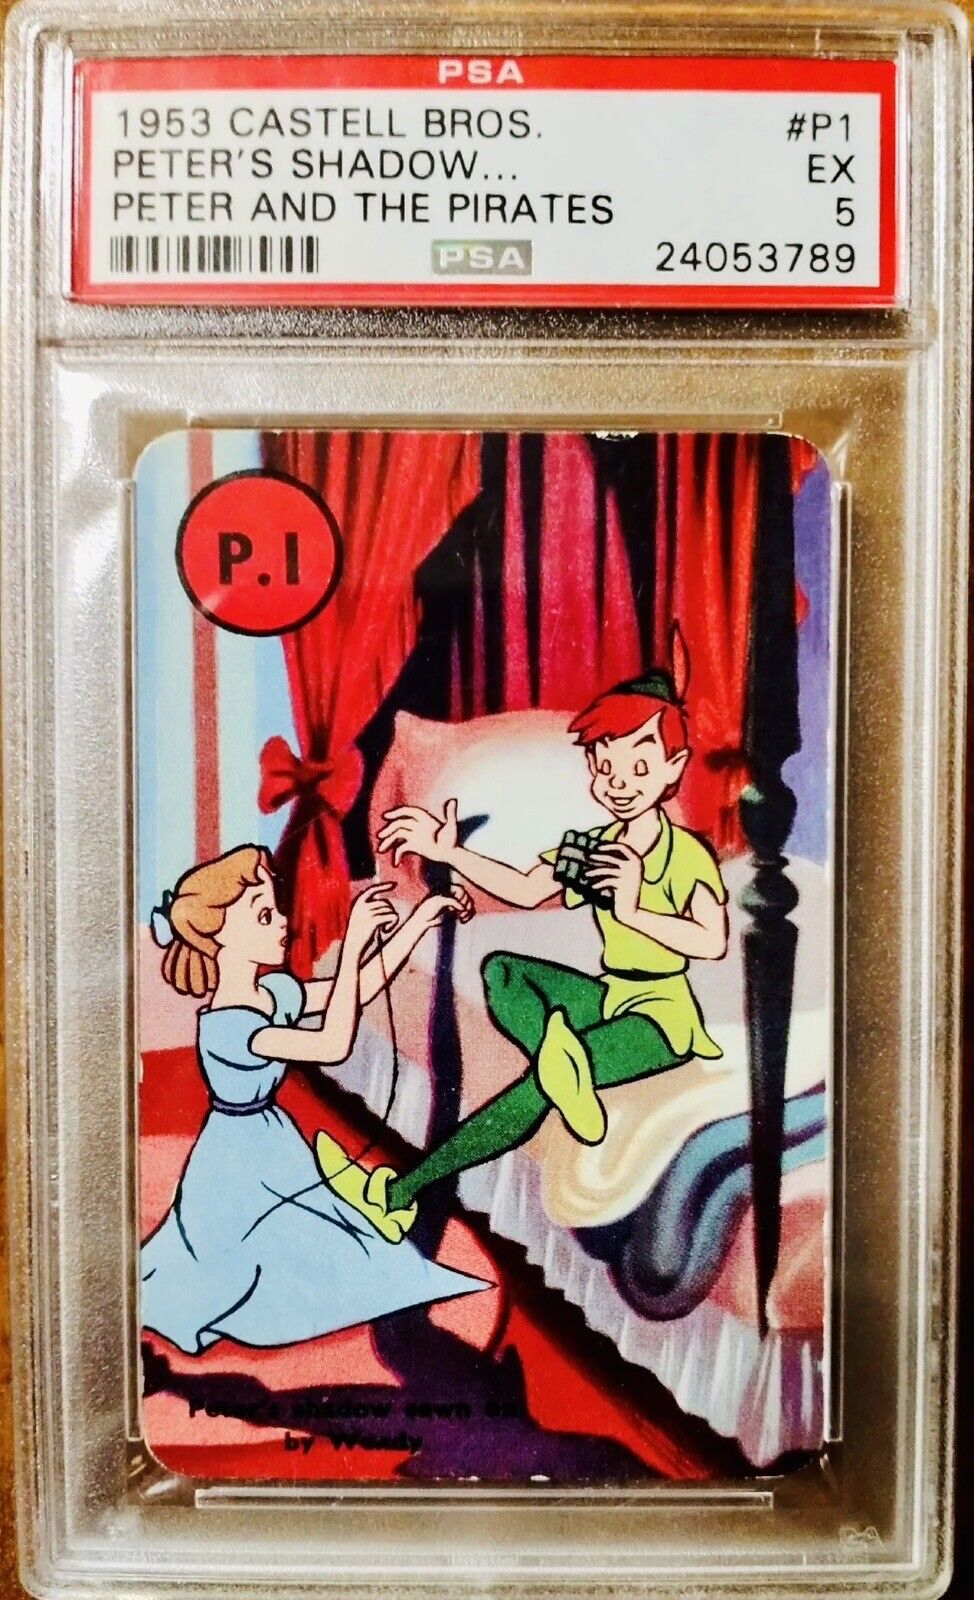 Walt Disney 1953 PETER PAN - CASTELL BROS Trading Card - Chase His Shadow PSA EX